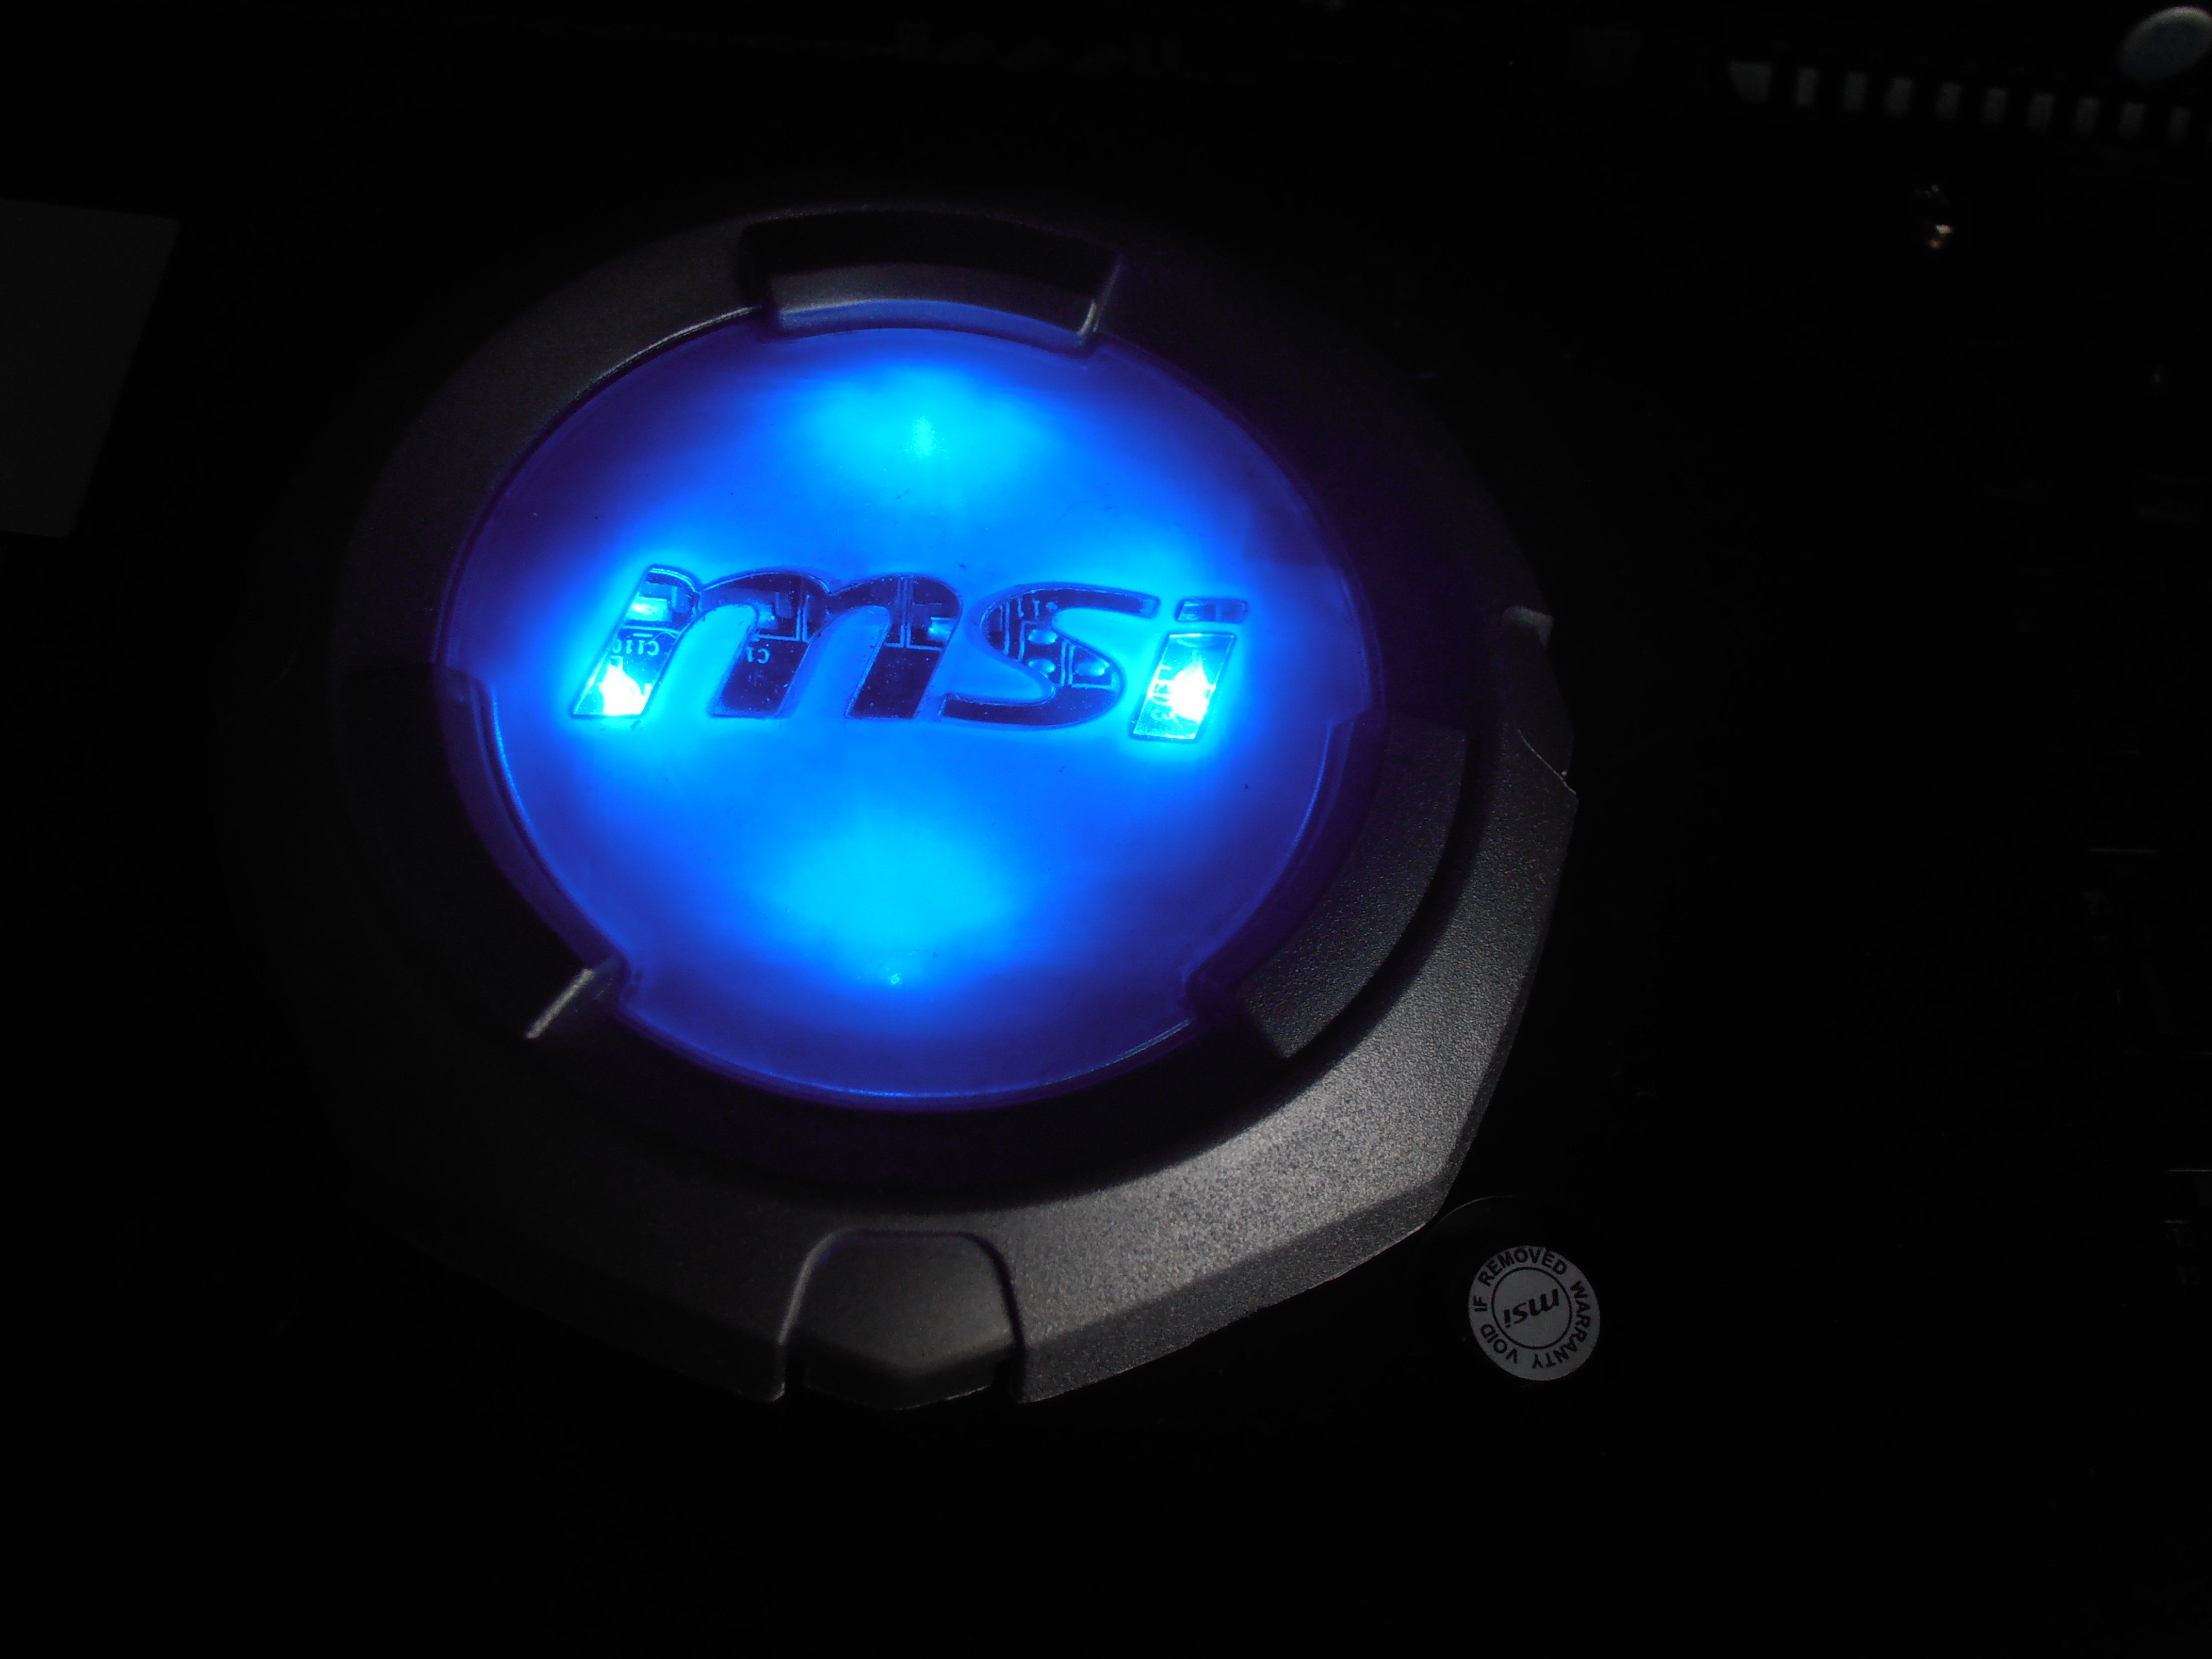 Msi Blue Wallpapers